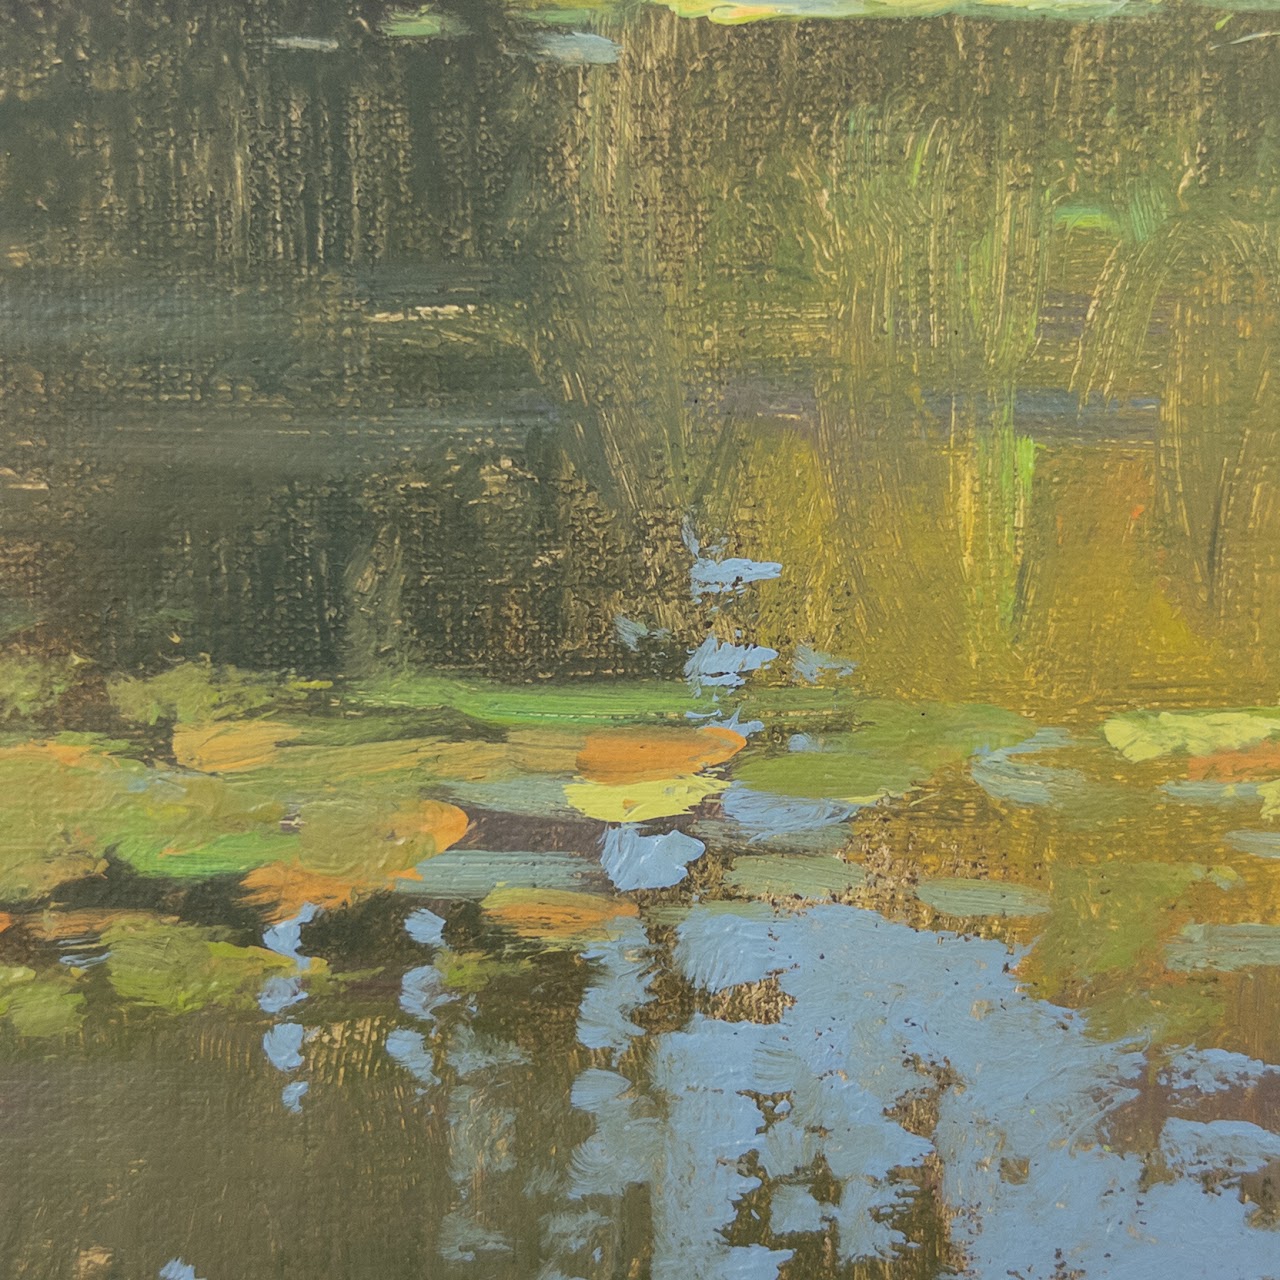 Stephen Magsig "Belle Island Waterlilies" Small Painting